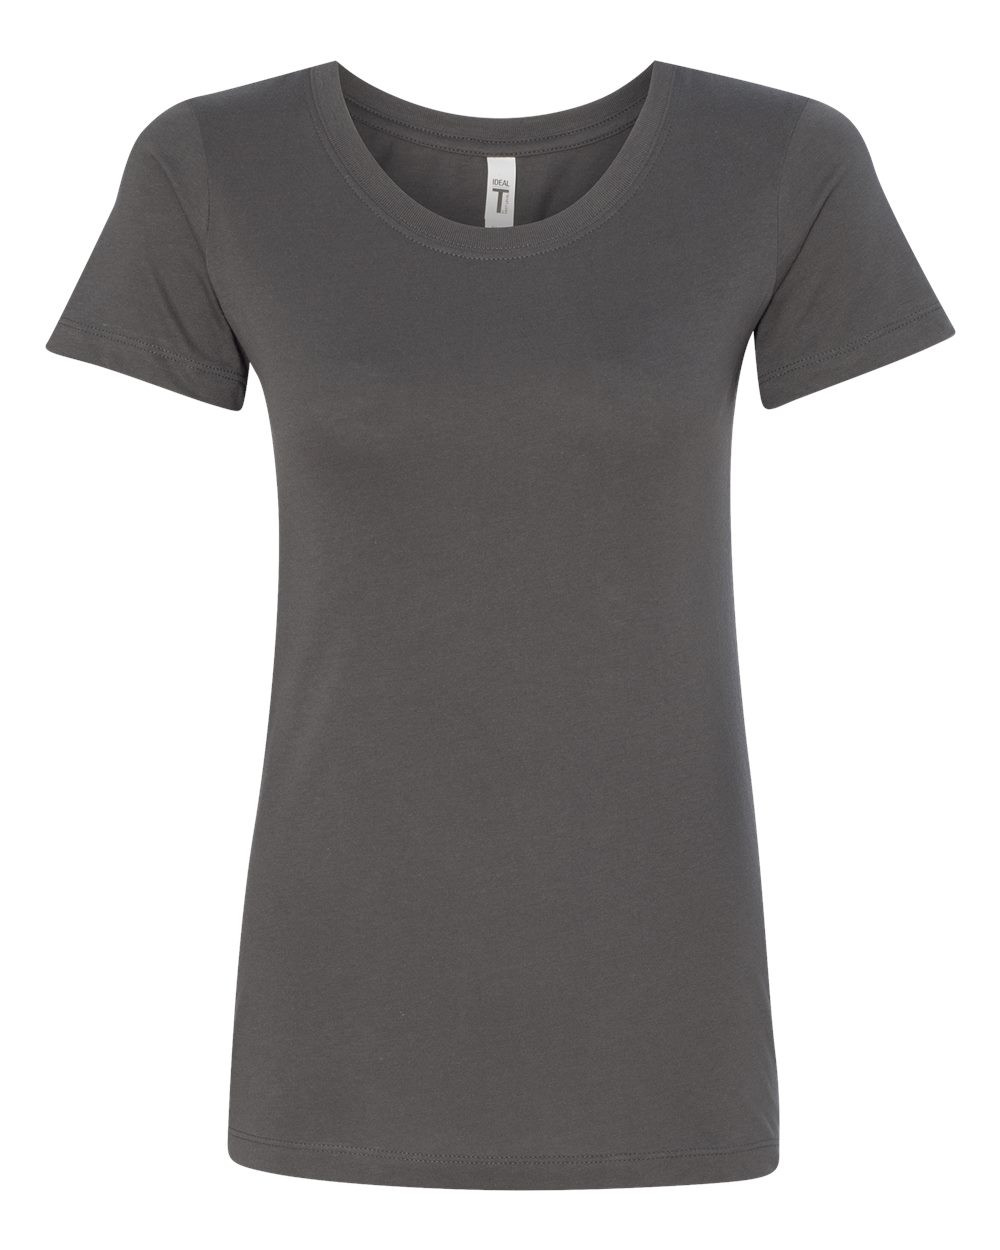 Next Level Women's Ideal Crew T Shirt Top Blank Plain Solid 1510 up to ...